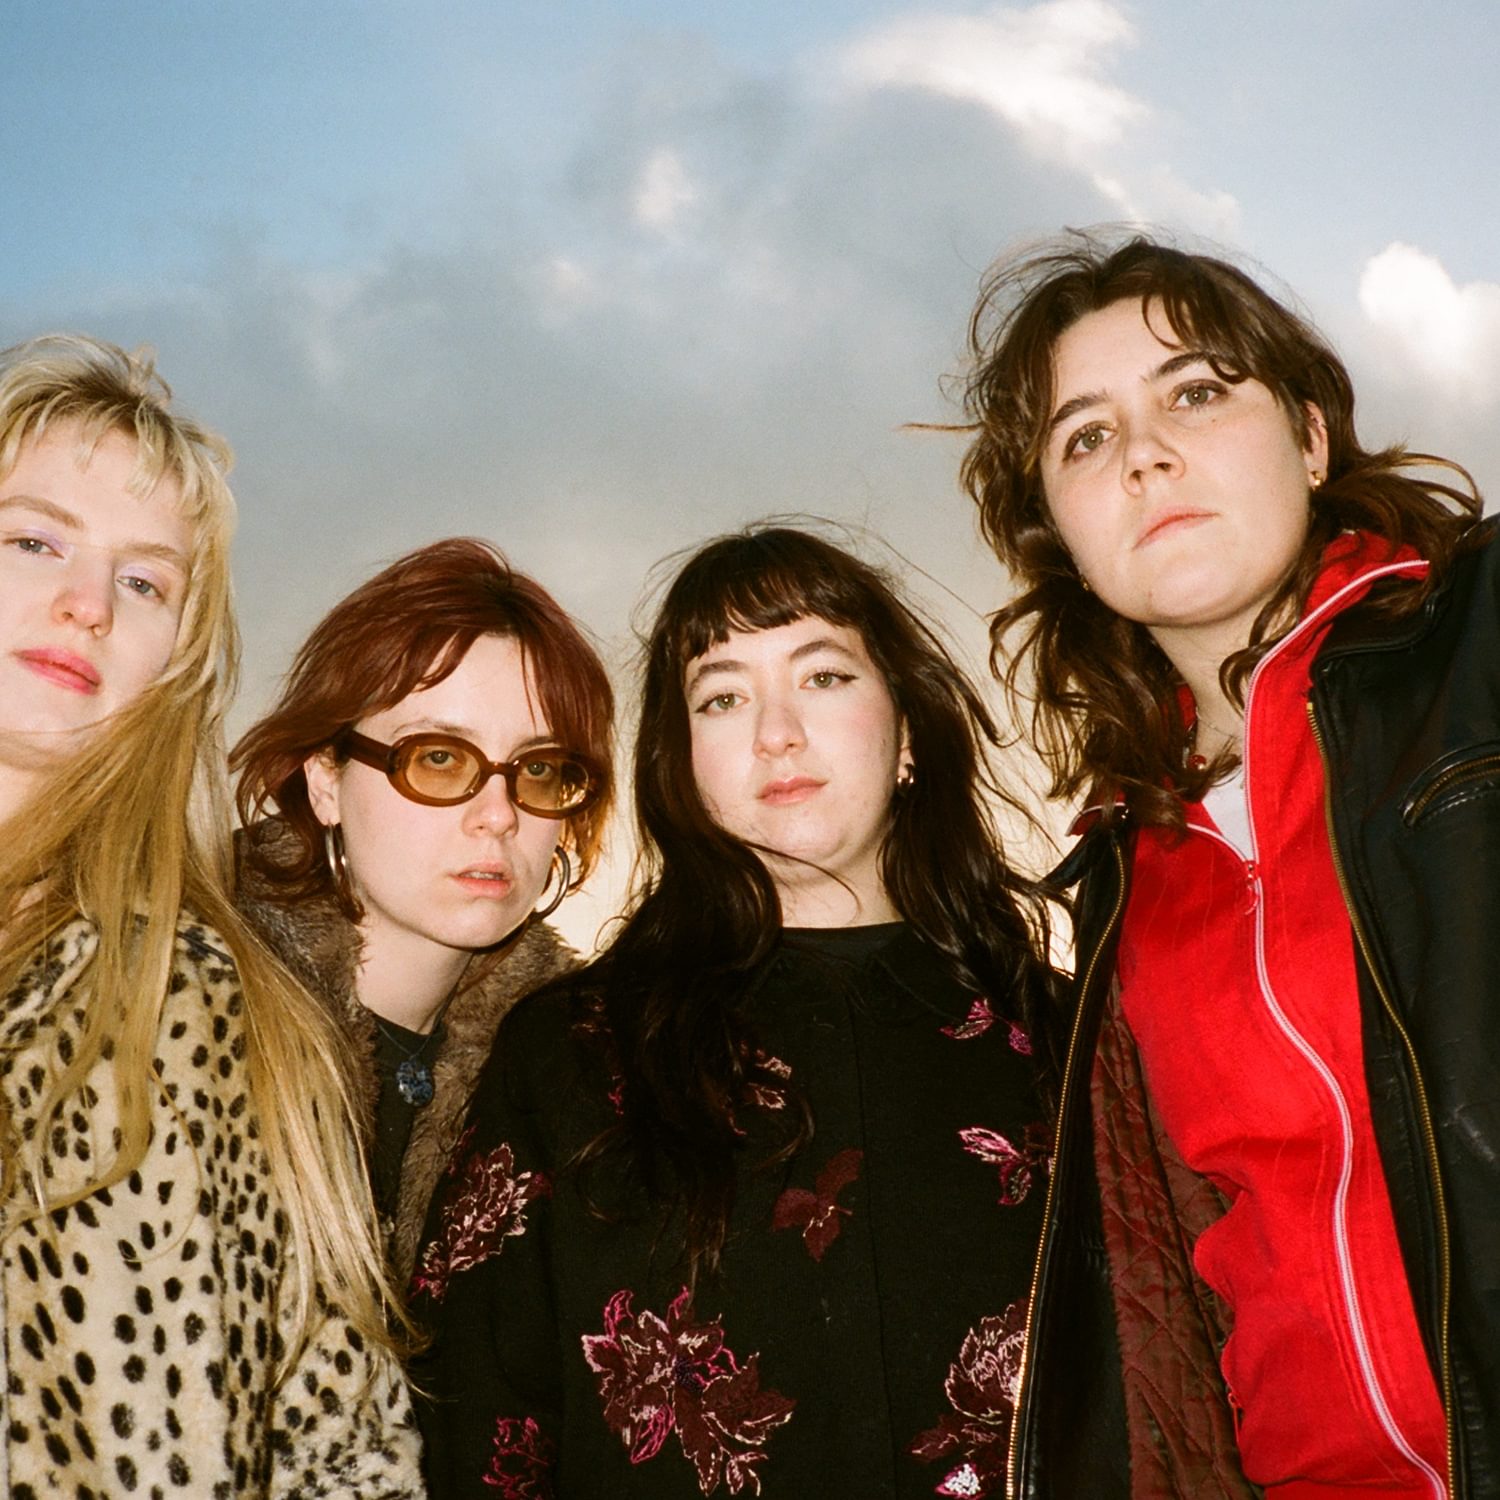 Lime Garden talk Brighton, friendship, and their debut album 'One More Thing'